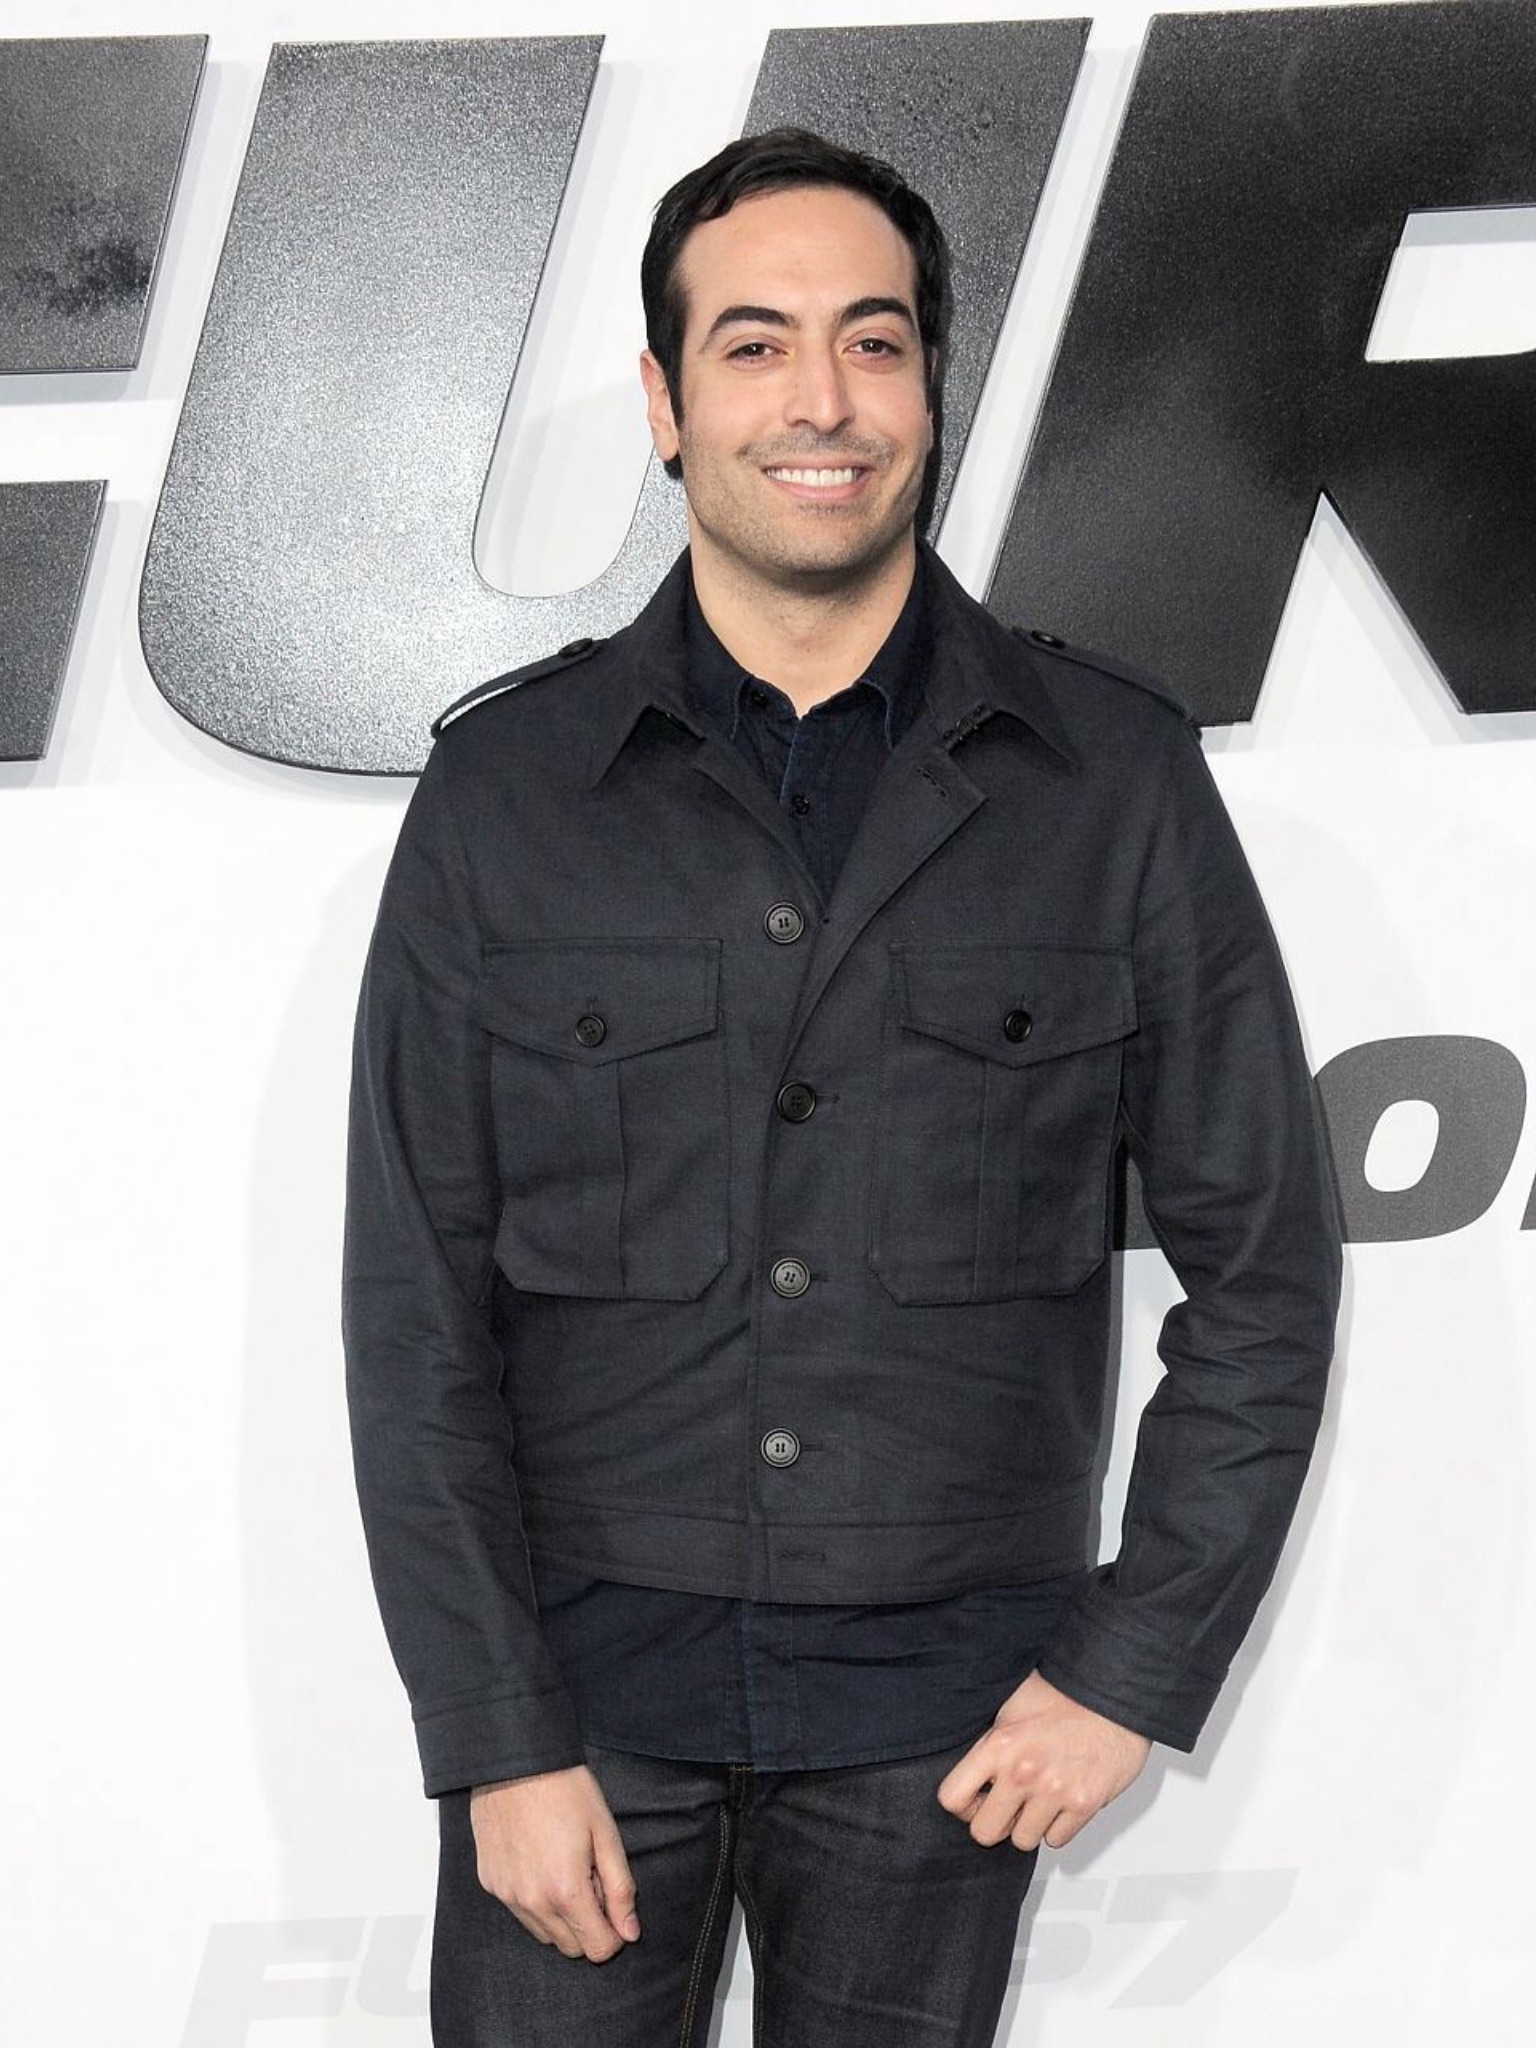 Mohammed Al Turki arrives for the Premiere Of Universal Pictures' 'Furious 7' held at TCL Chinese Theatre on April 1, 2015 in Hollywood, California. CREDIT: ALBERT L. ORTEGA